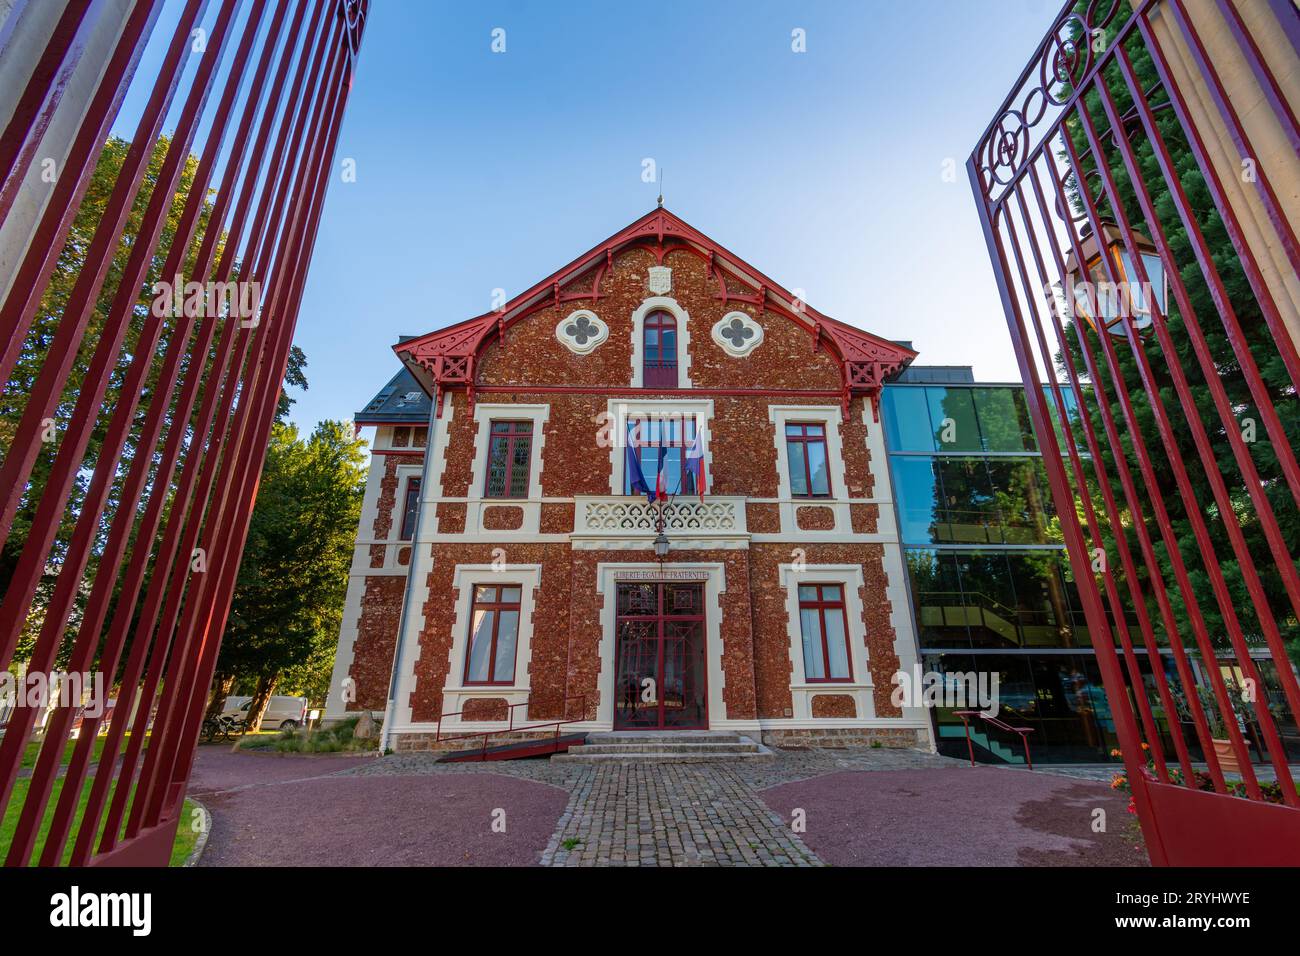 Exterior view of Viroflay city hall. Viroflay is a town located in the Yvelines department in the Ile-de-France region, west of Paris Stock Photo